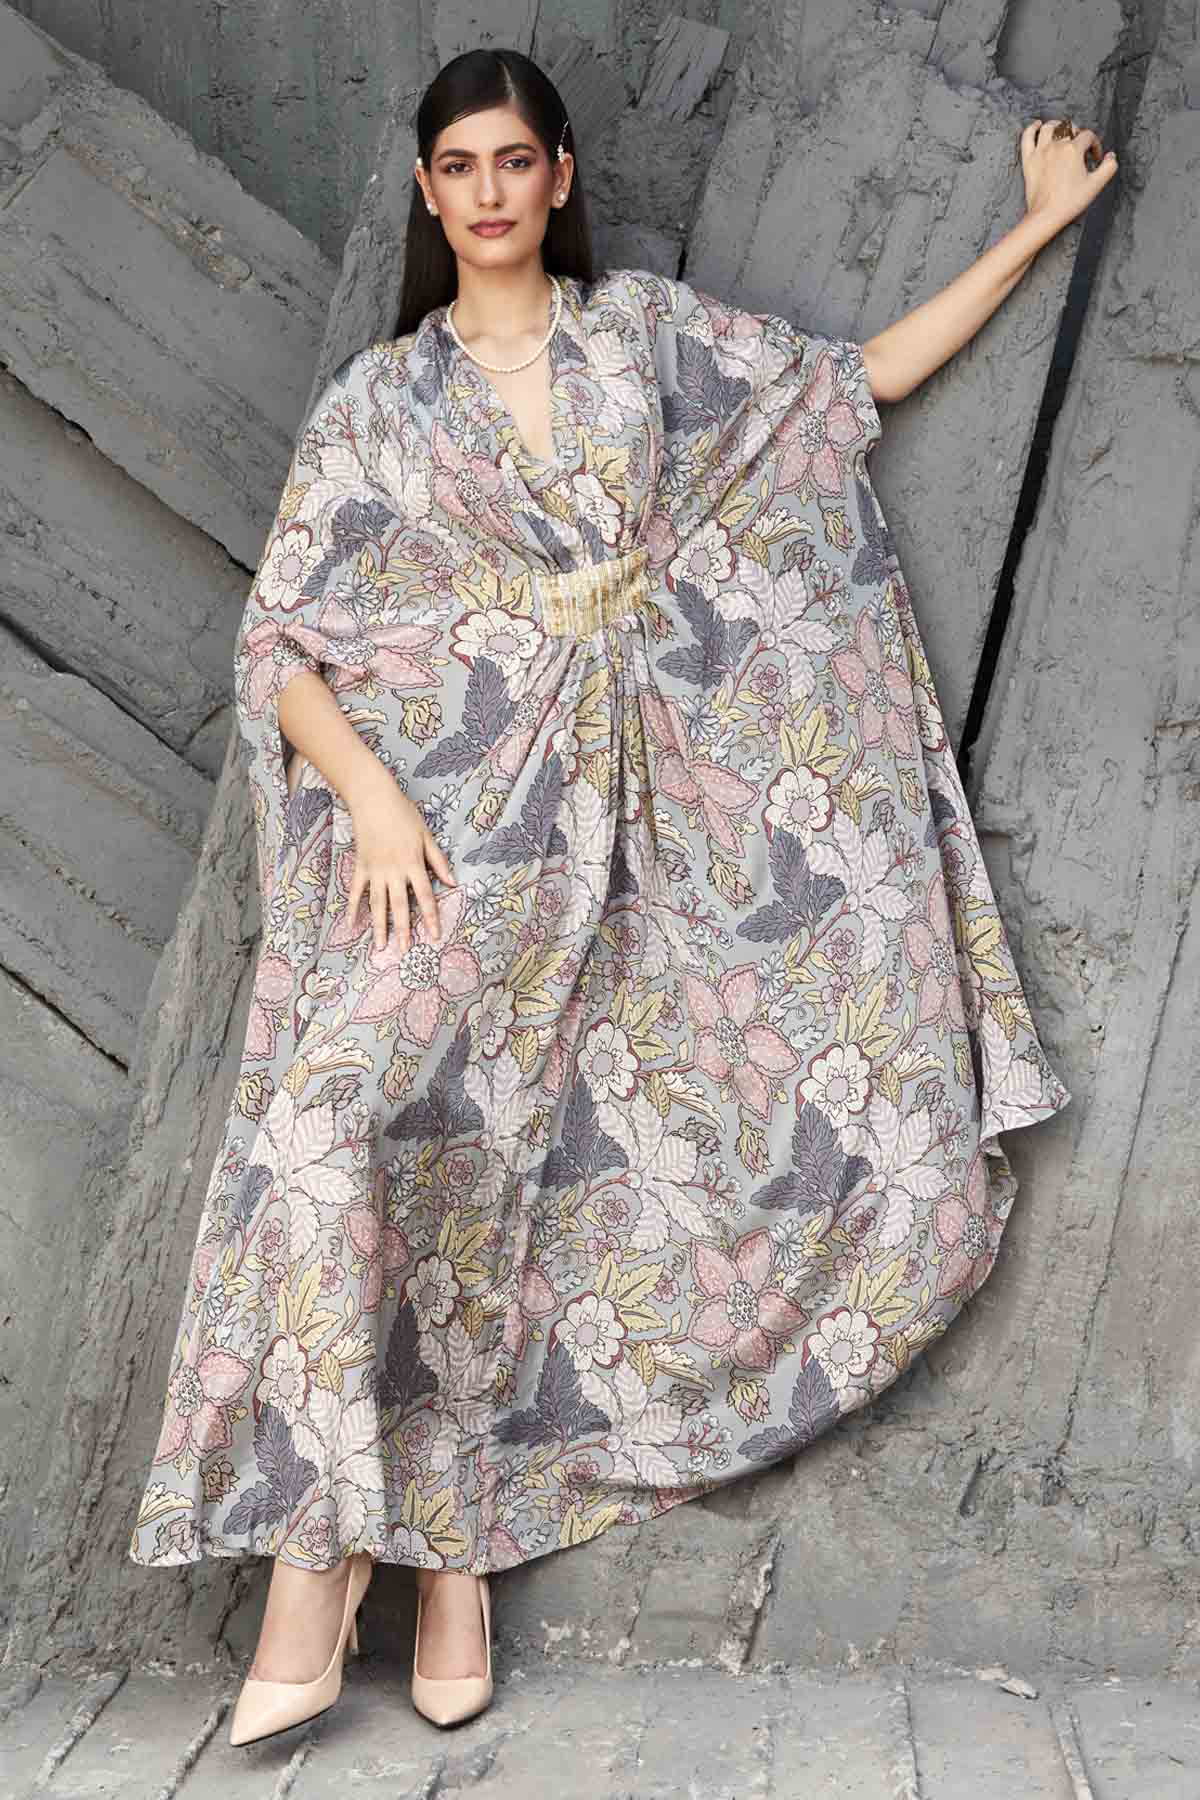 Designer Ranian Pearl grey georgette printed kaftan with embroidery detail at under bust For women Online at ScrollnShops